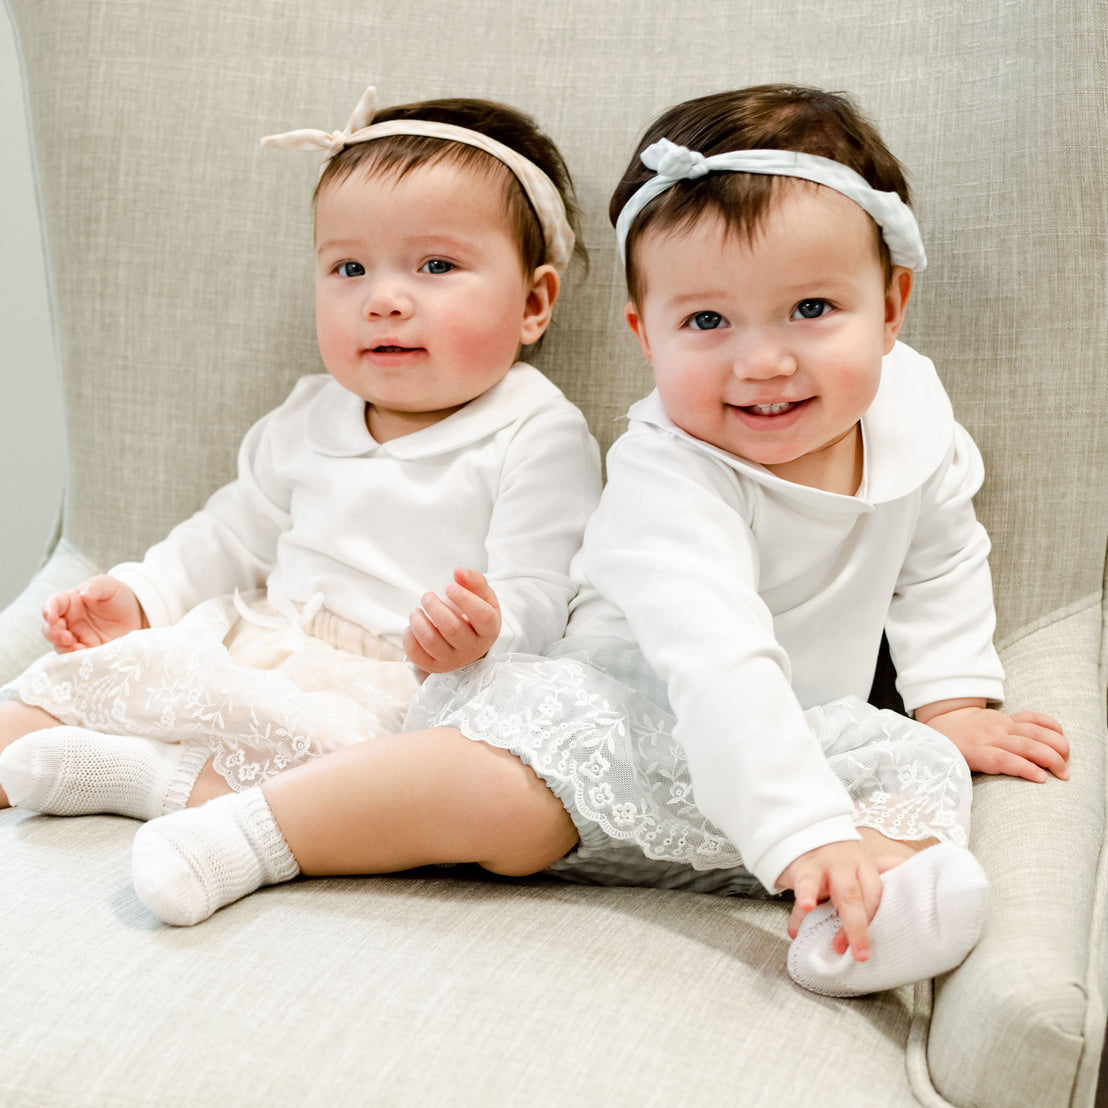 Two cheerful baby girls, dressed in the Isla Bubble Skirt Set with heirloom lace skirts and matching Isla Tie Headbands, sitting together on a light gray sofa.